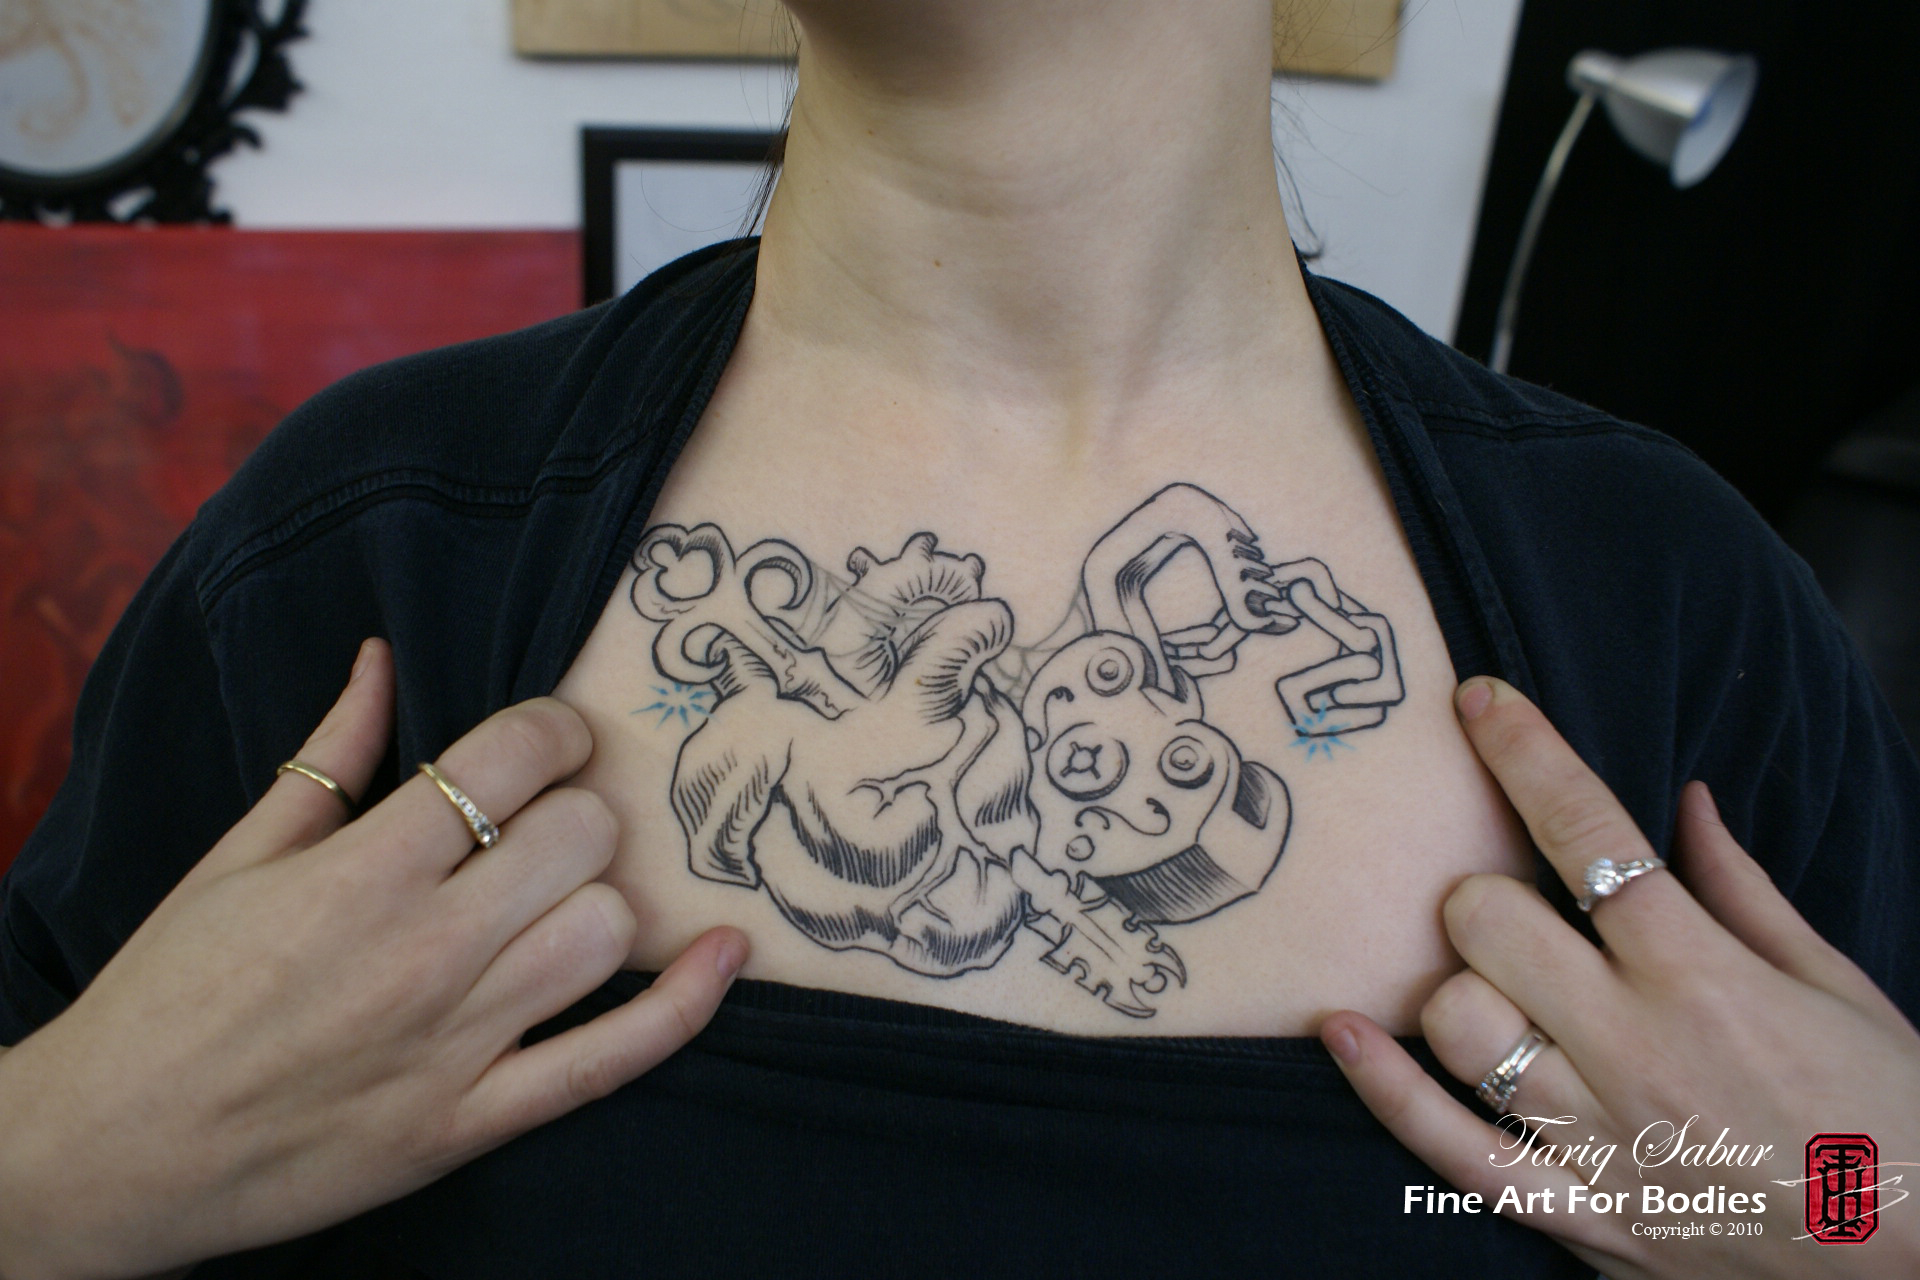 Female Chest Tattoo Fine Art For Bodies intended for dimensions 1920 X 1280